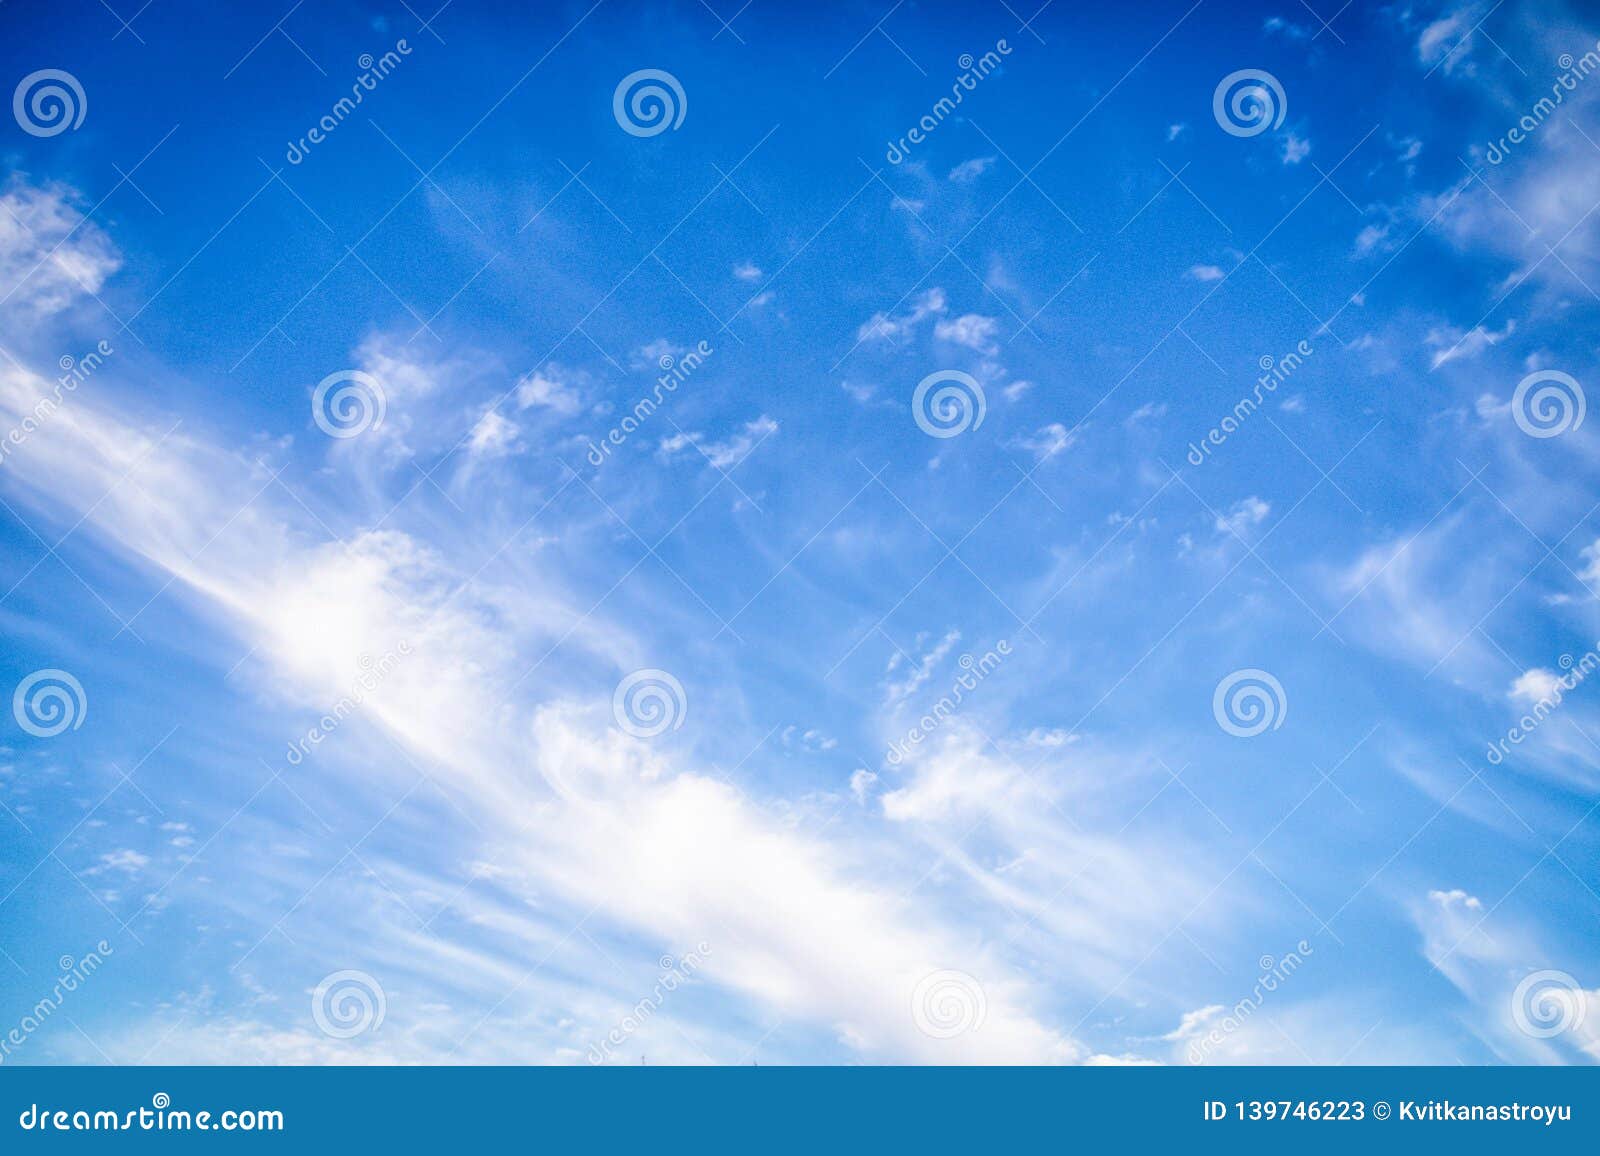 beautiful sky background. blue sky with cirro cumulus white clouds